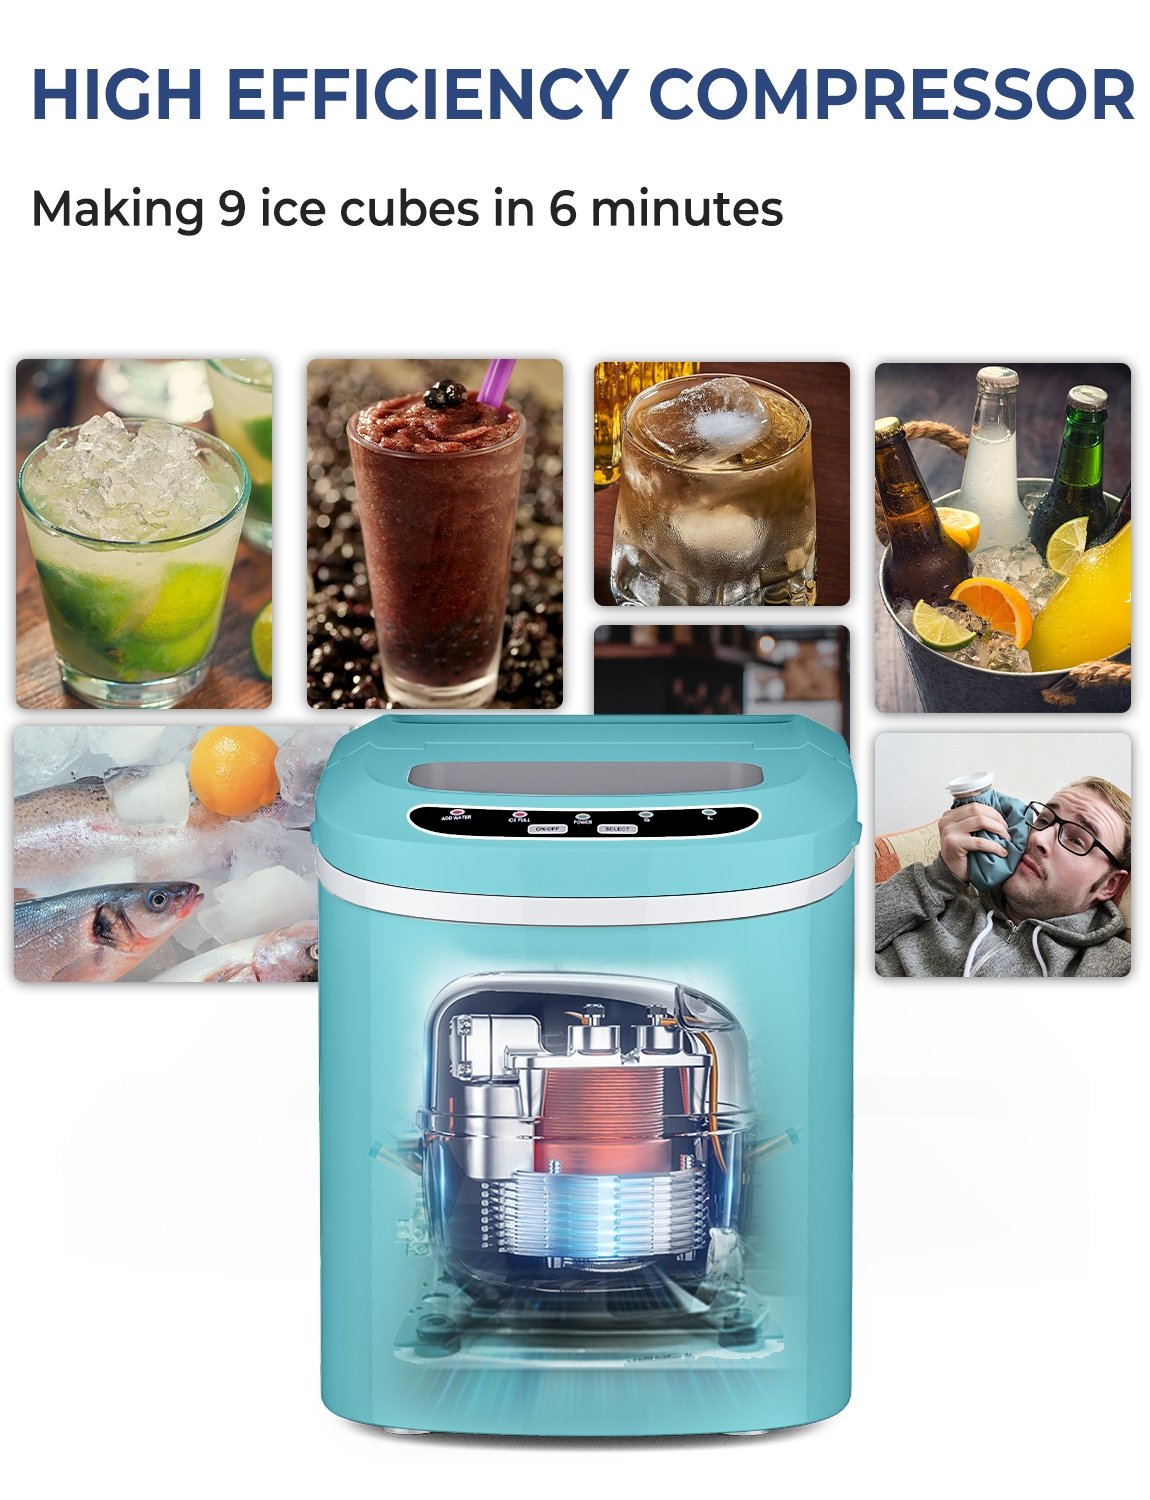 Mini Portable Compact Electric Ice Maker Machine, Green at Gallery Canada